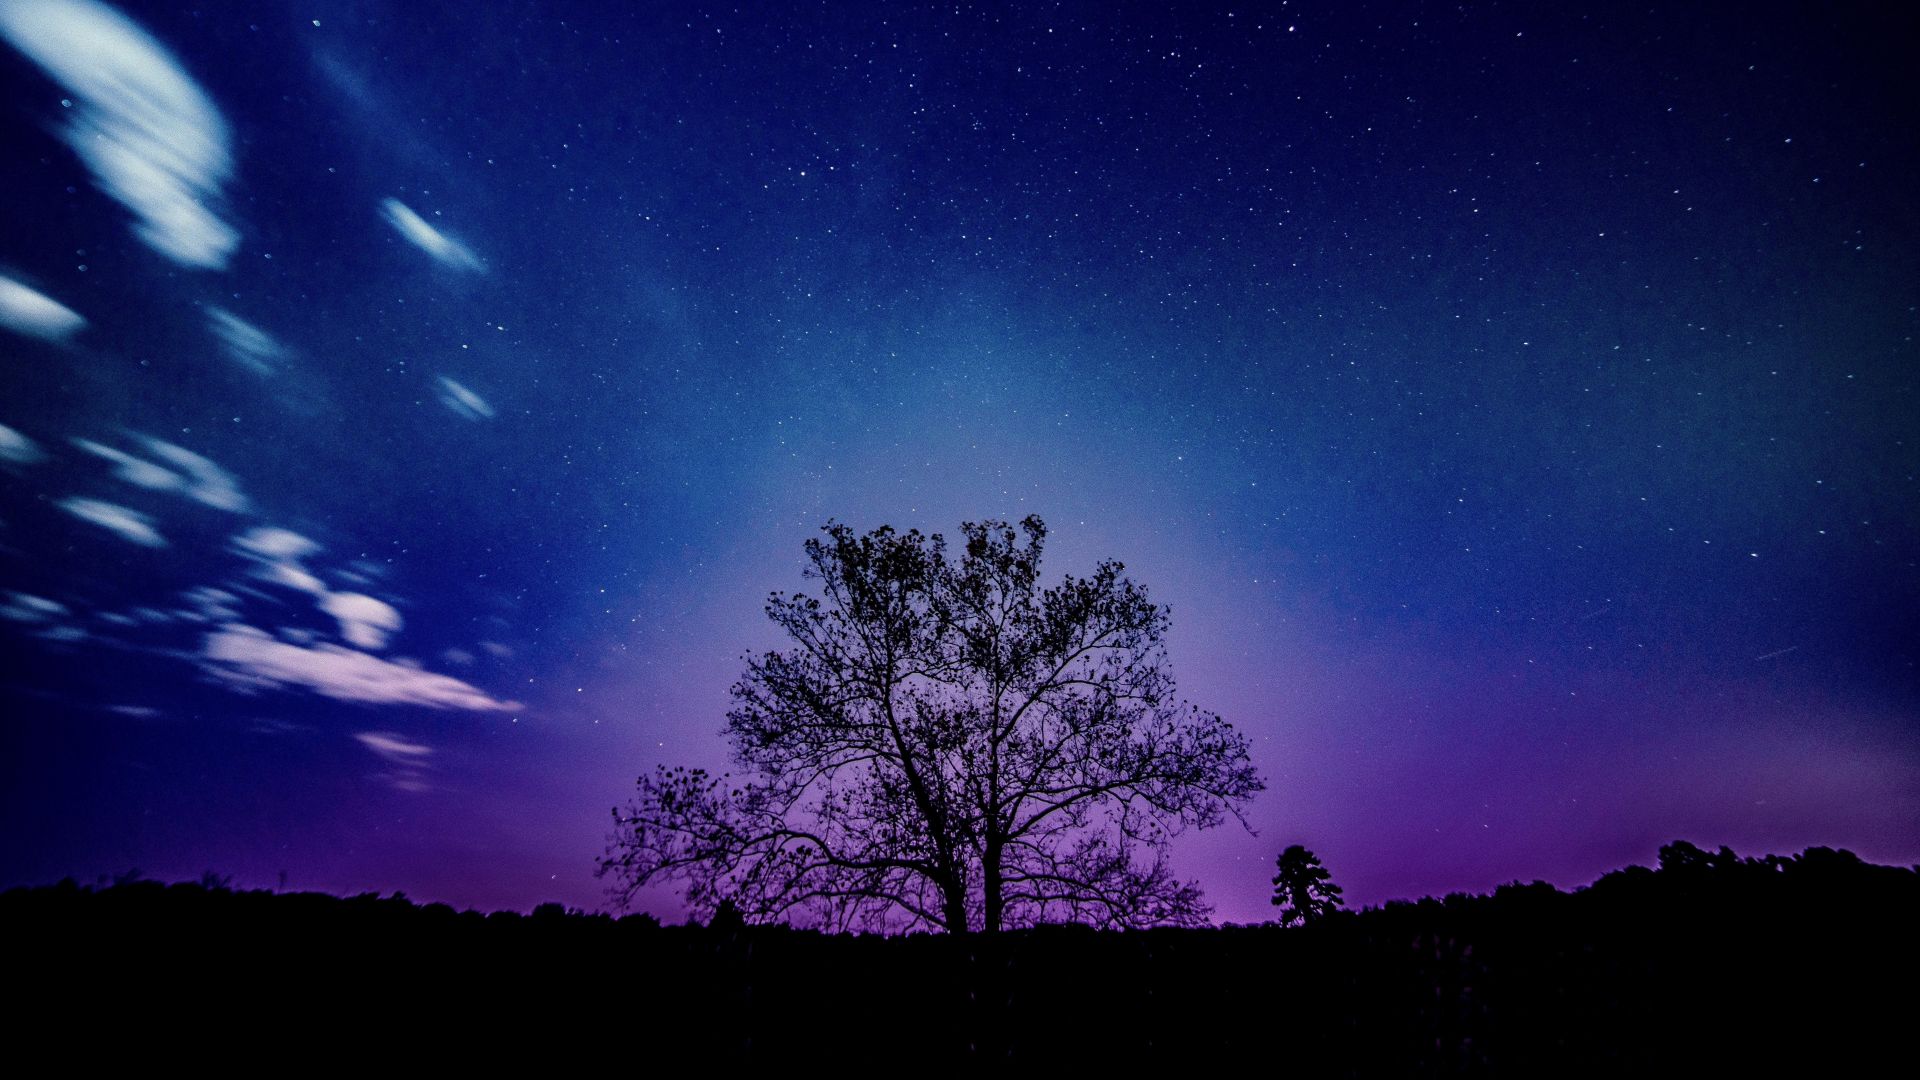 Tree, galaxy, sky, silhouette wallpaper, HD image, picture, background, b4eb7a